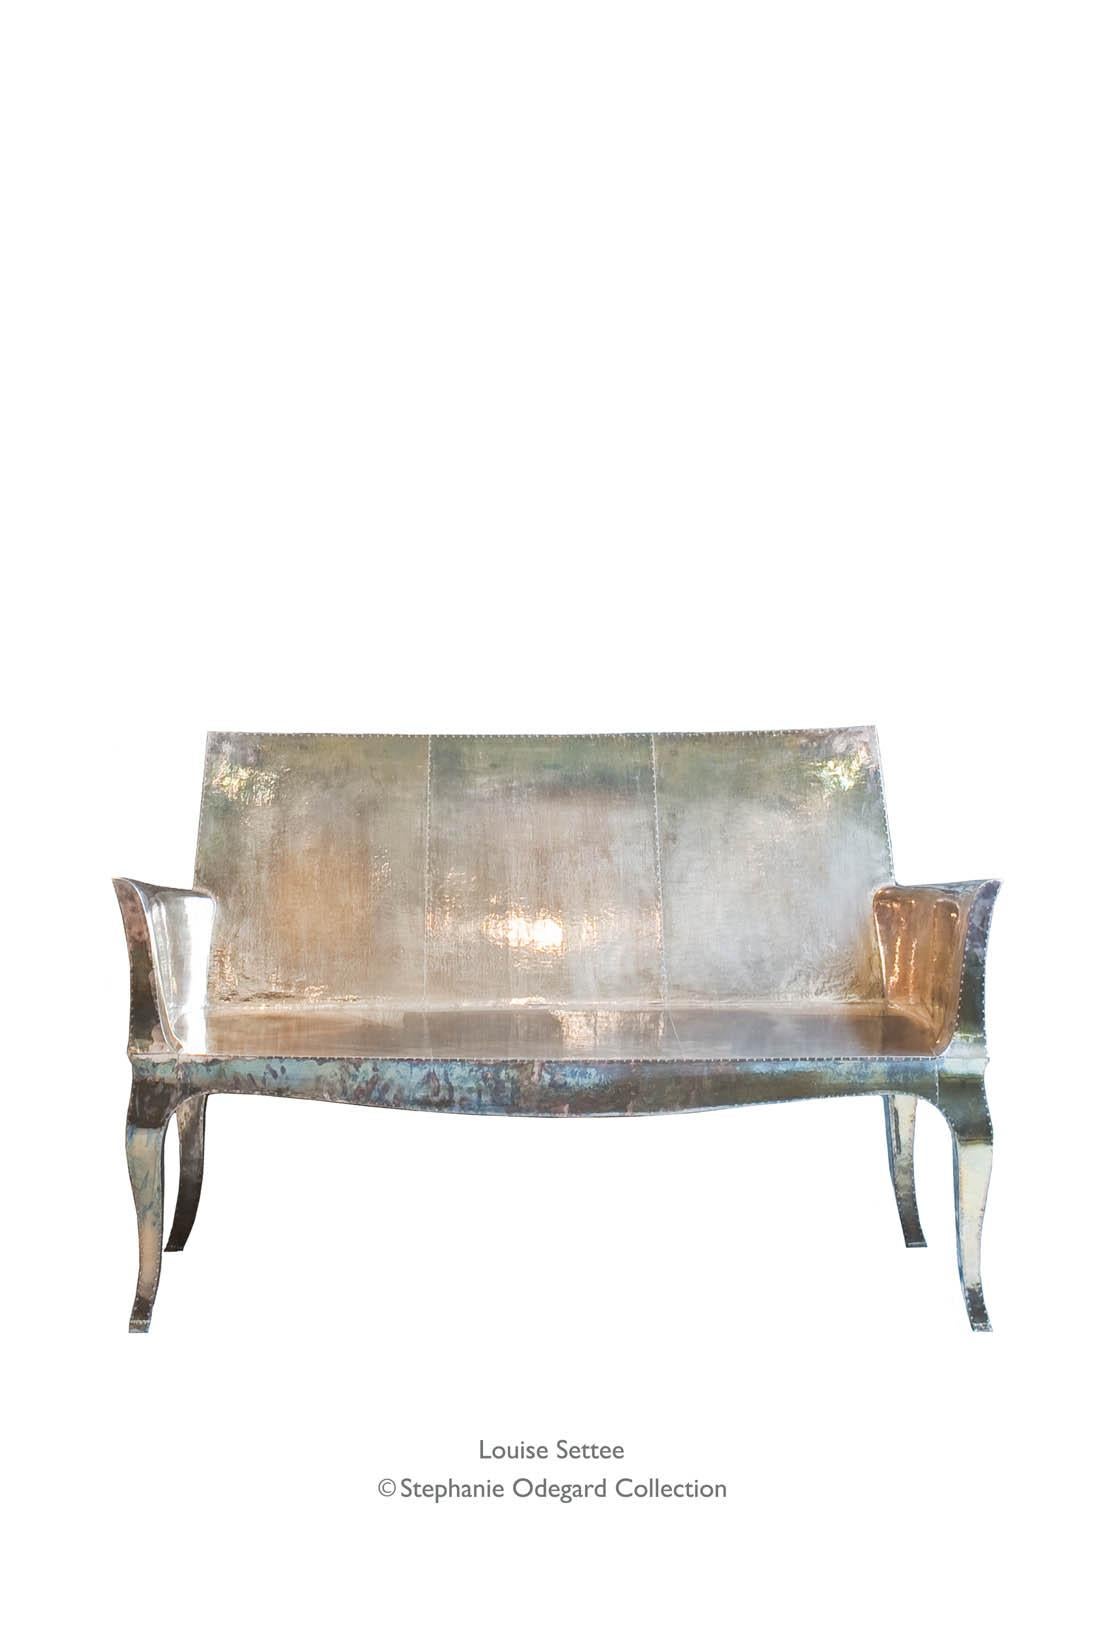 Louise Settee Art Deco Daybeds in Mid. Hammered Antique Bronze by Paul Mathieu  For Sale 6